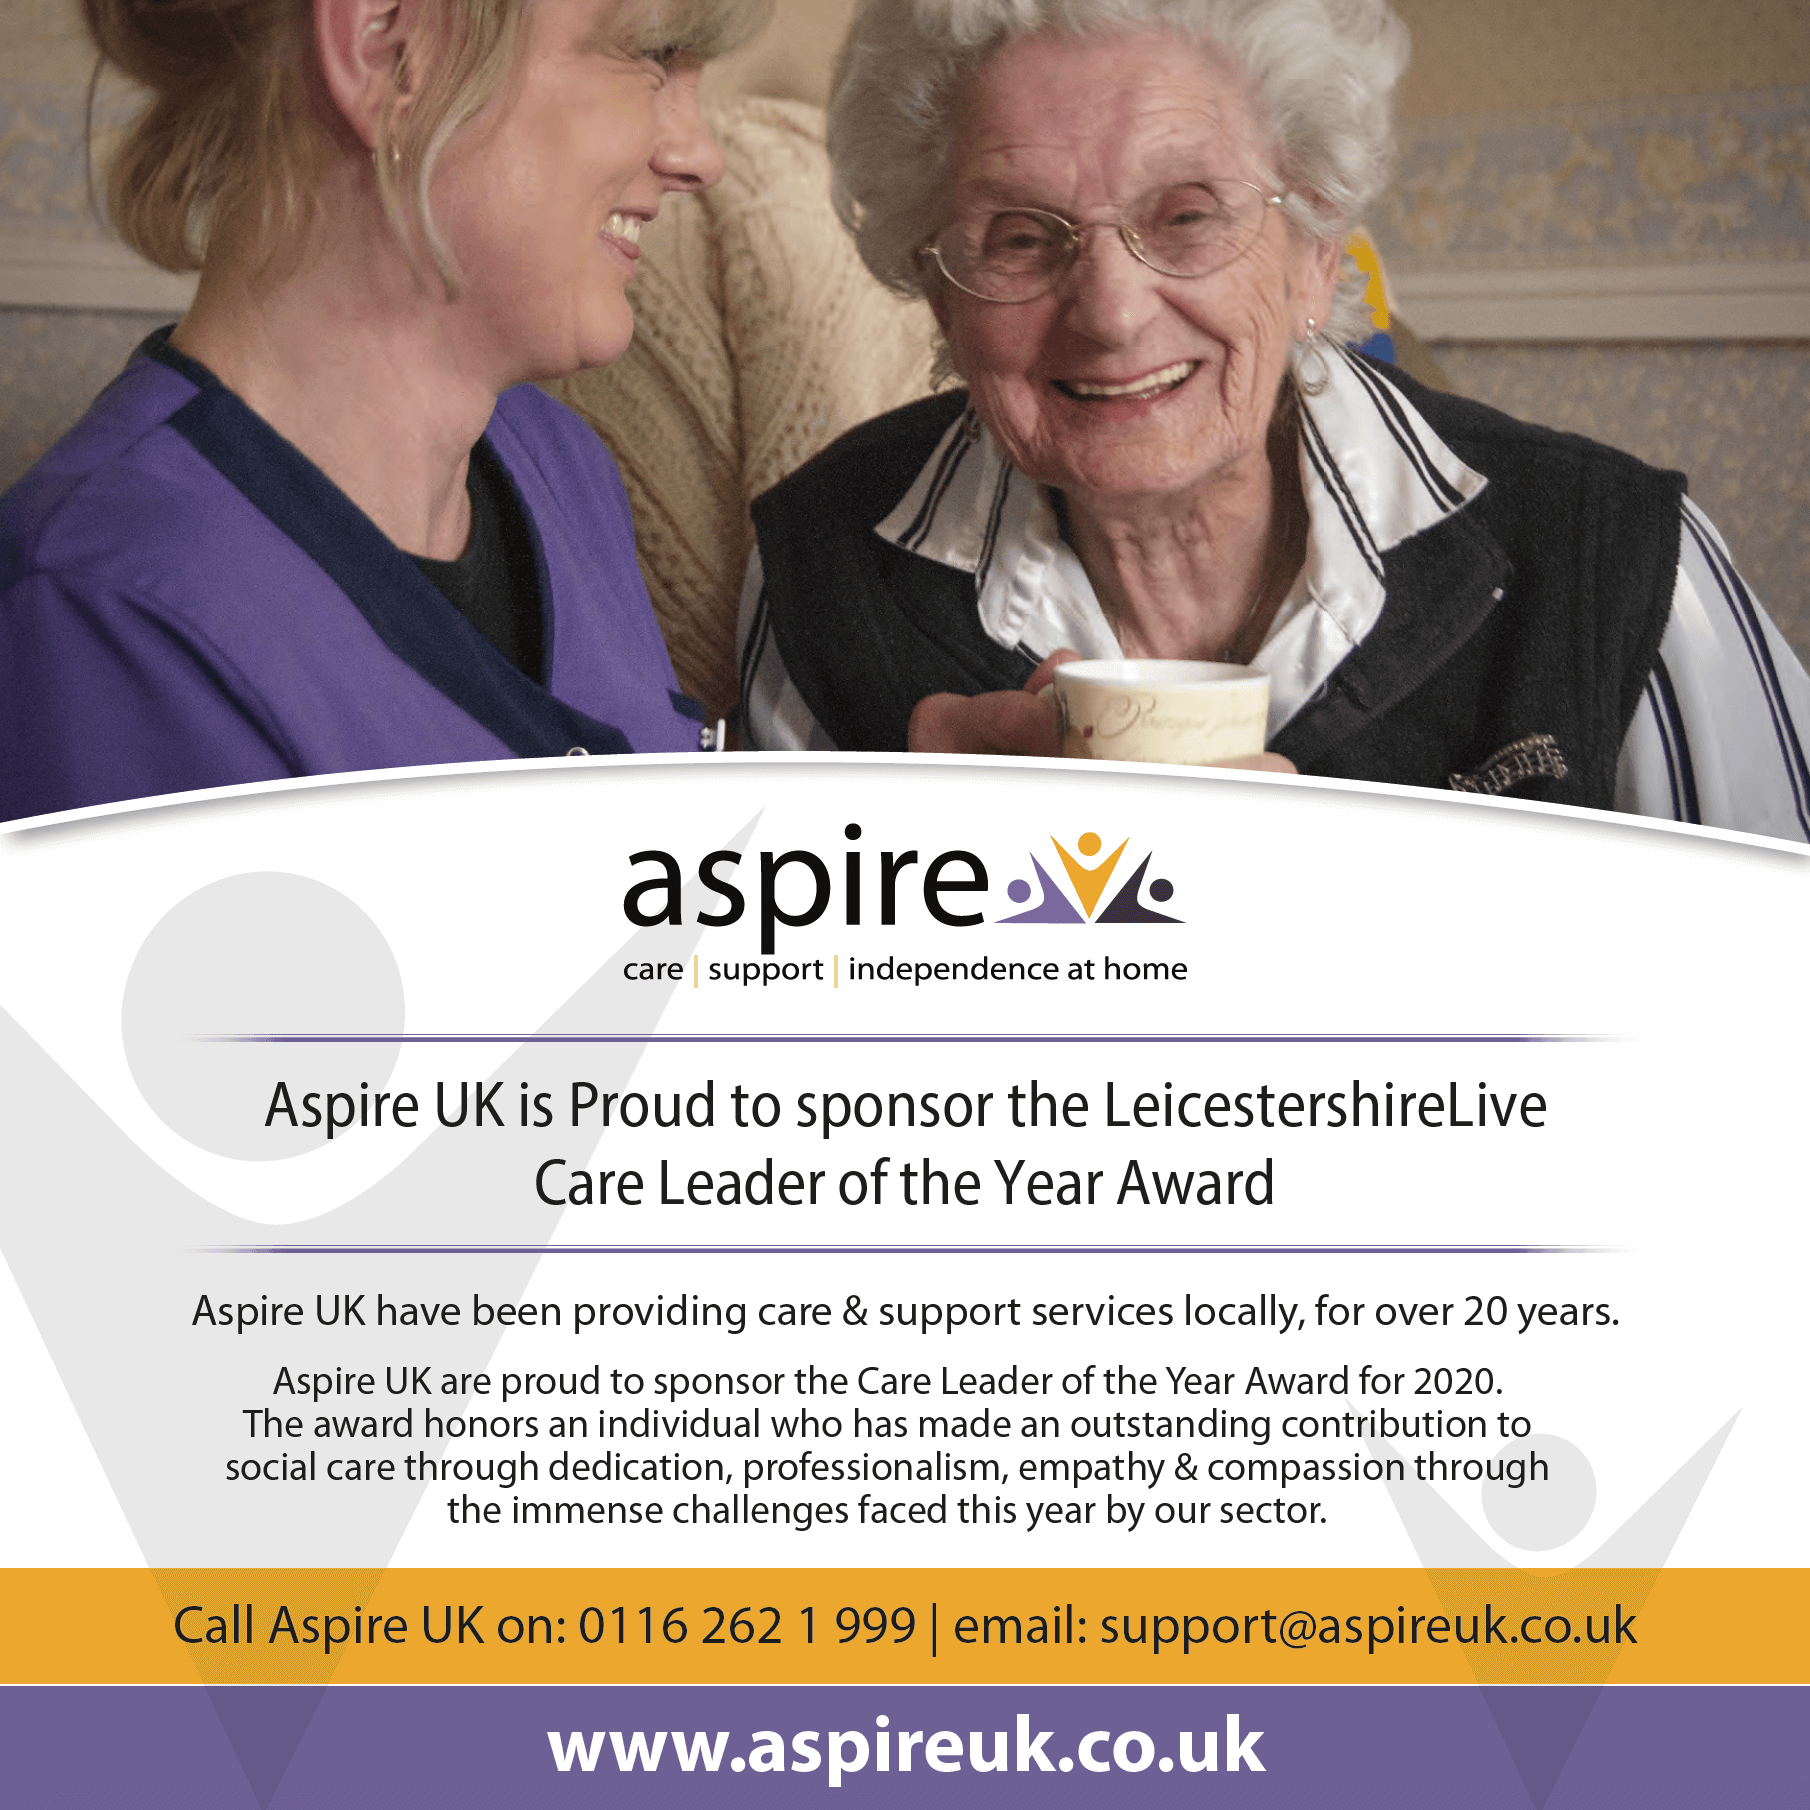 Aspire Sponsor Leicestershire Live - Care Professional of the Year Award 2020